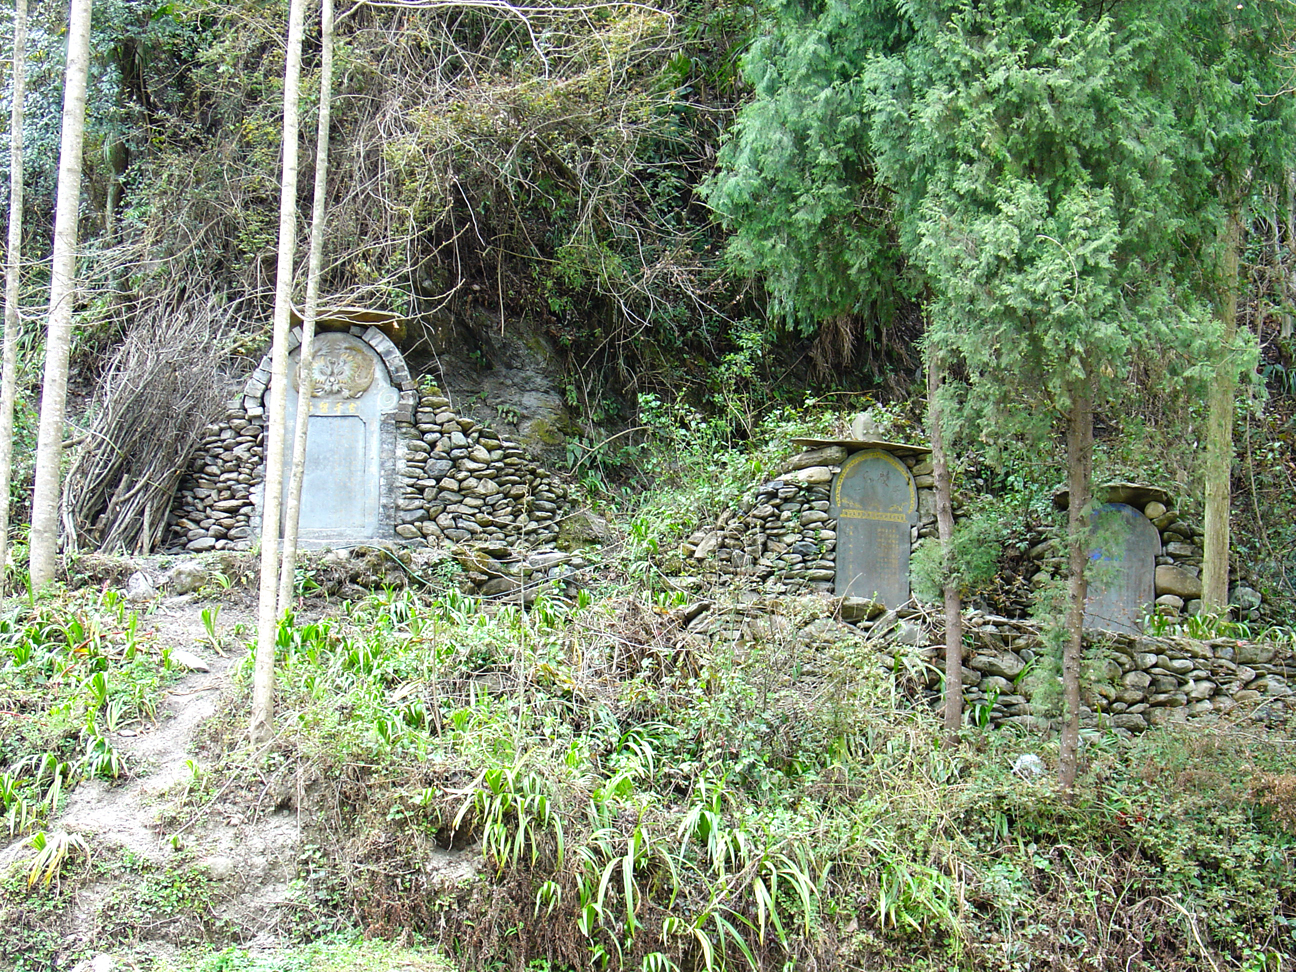 The small village on the hills III - Chinese tombstones